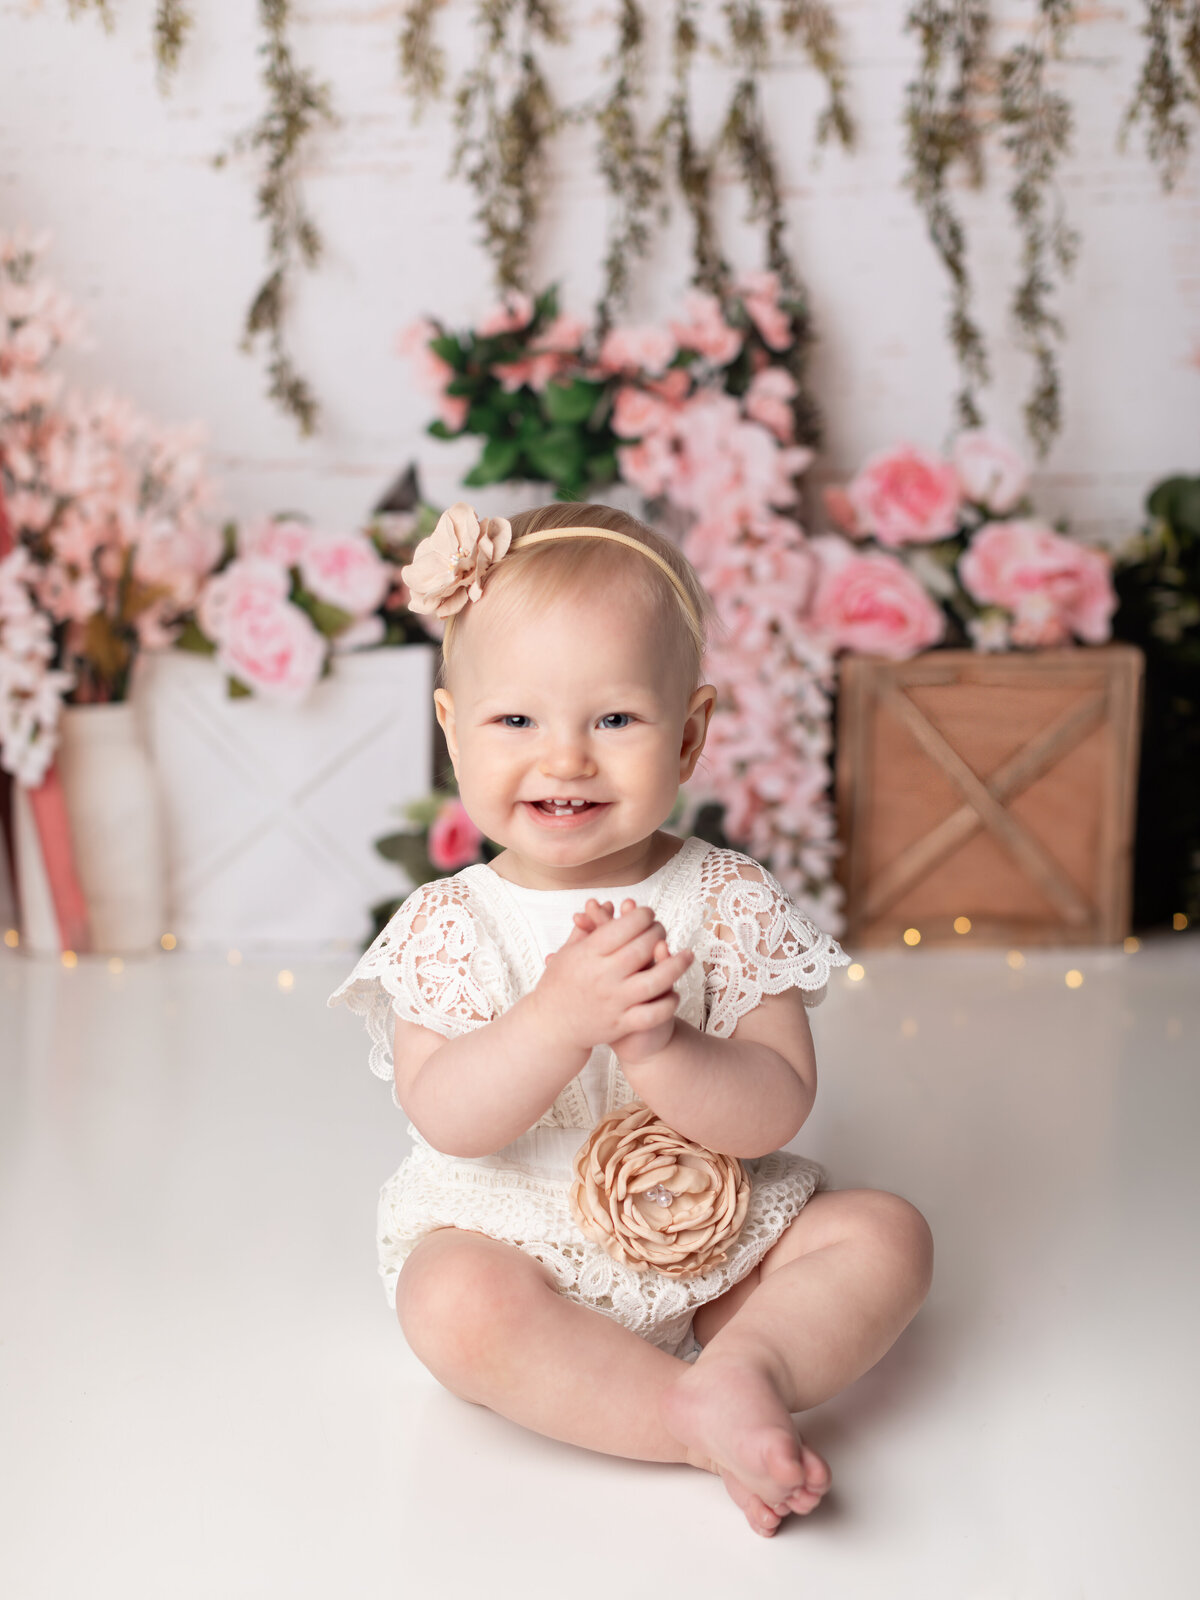 one year old girl birthday photoshoot with floral background